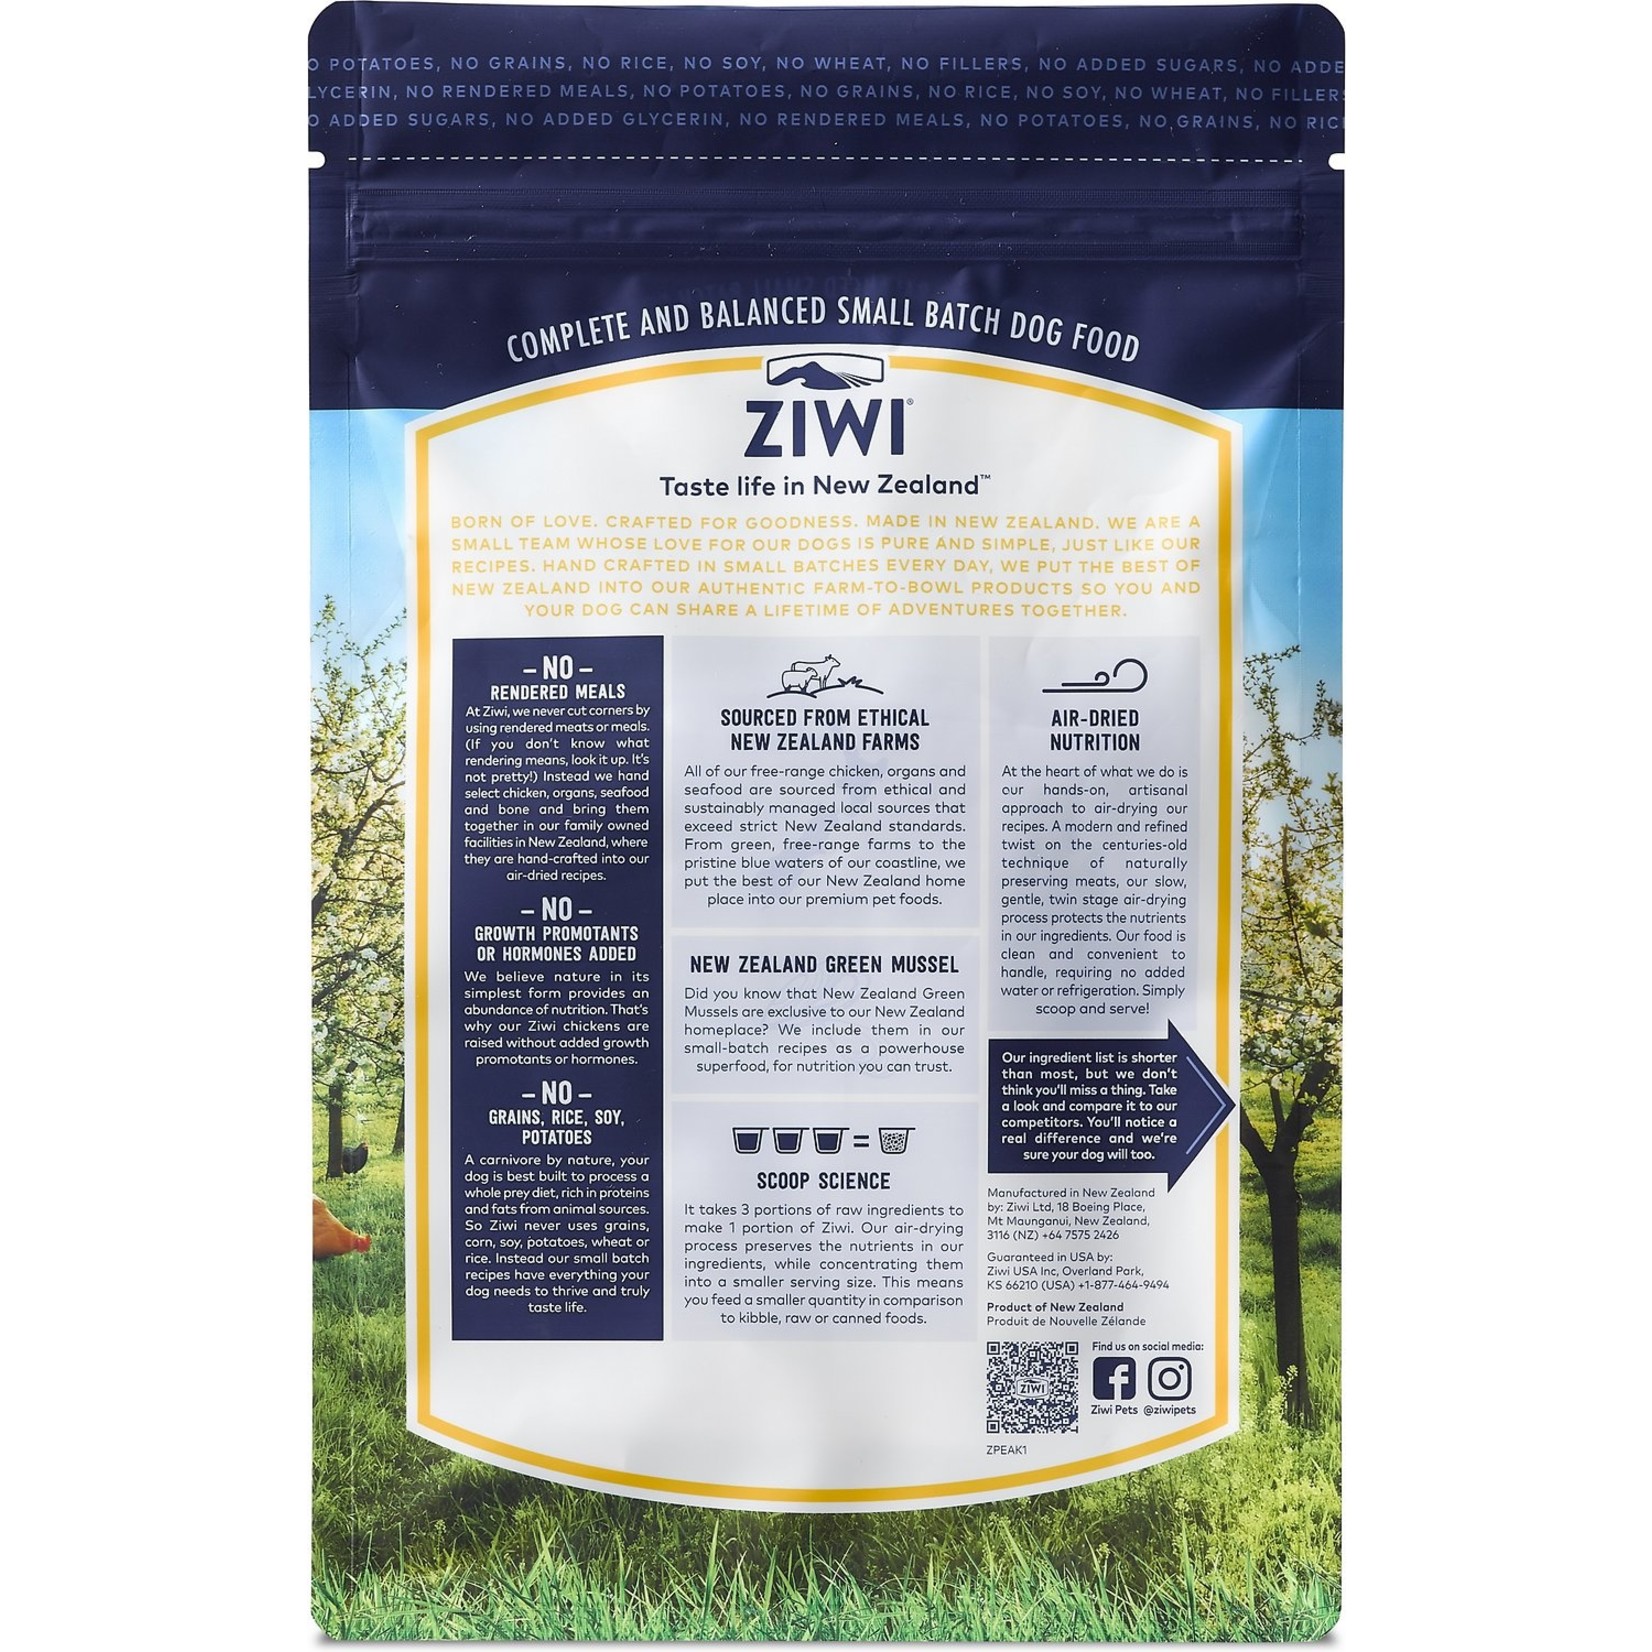 ZIWI Pets ZIWI Peak Original - Gently Air-Dried Chicken Recipe for Dogs